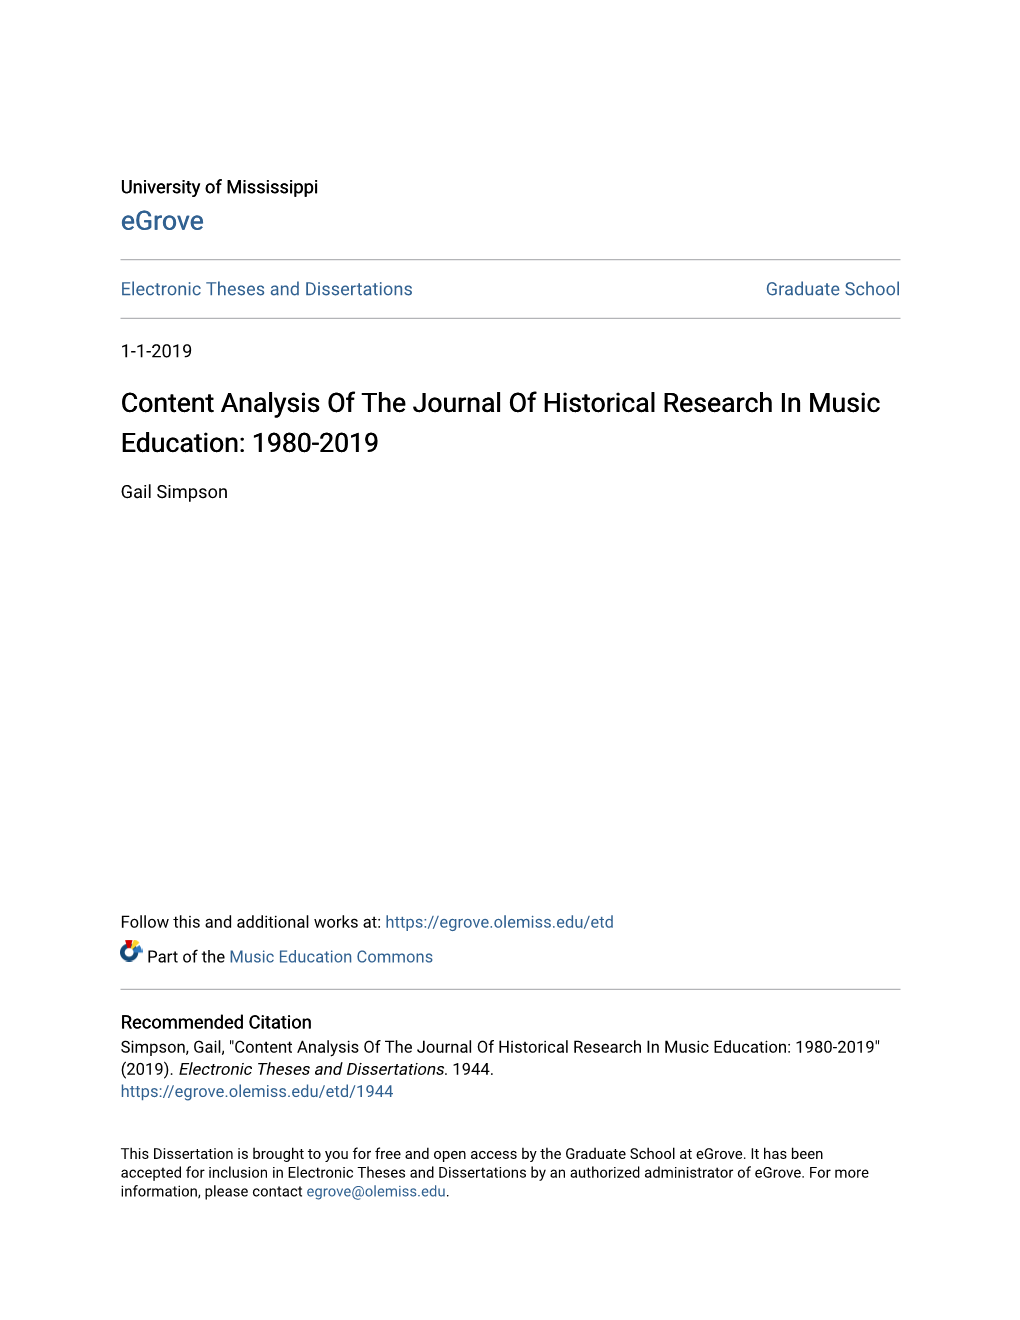 Content Analysis of the Journal of Historical Research in Music Education: 1980-2019